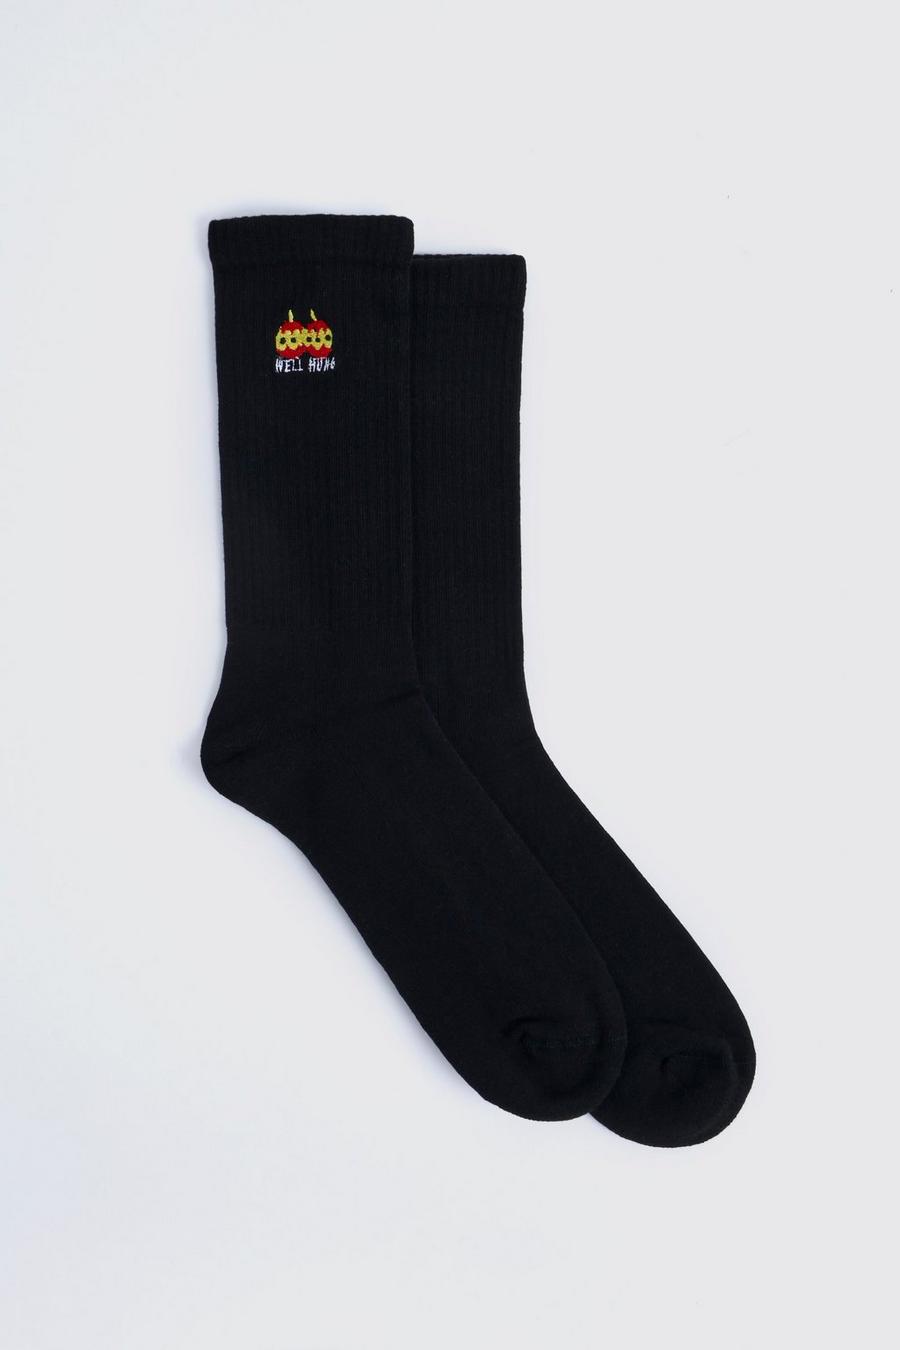 Black Embroidered Christmas Well Hung Sock image number 1